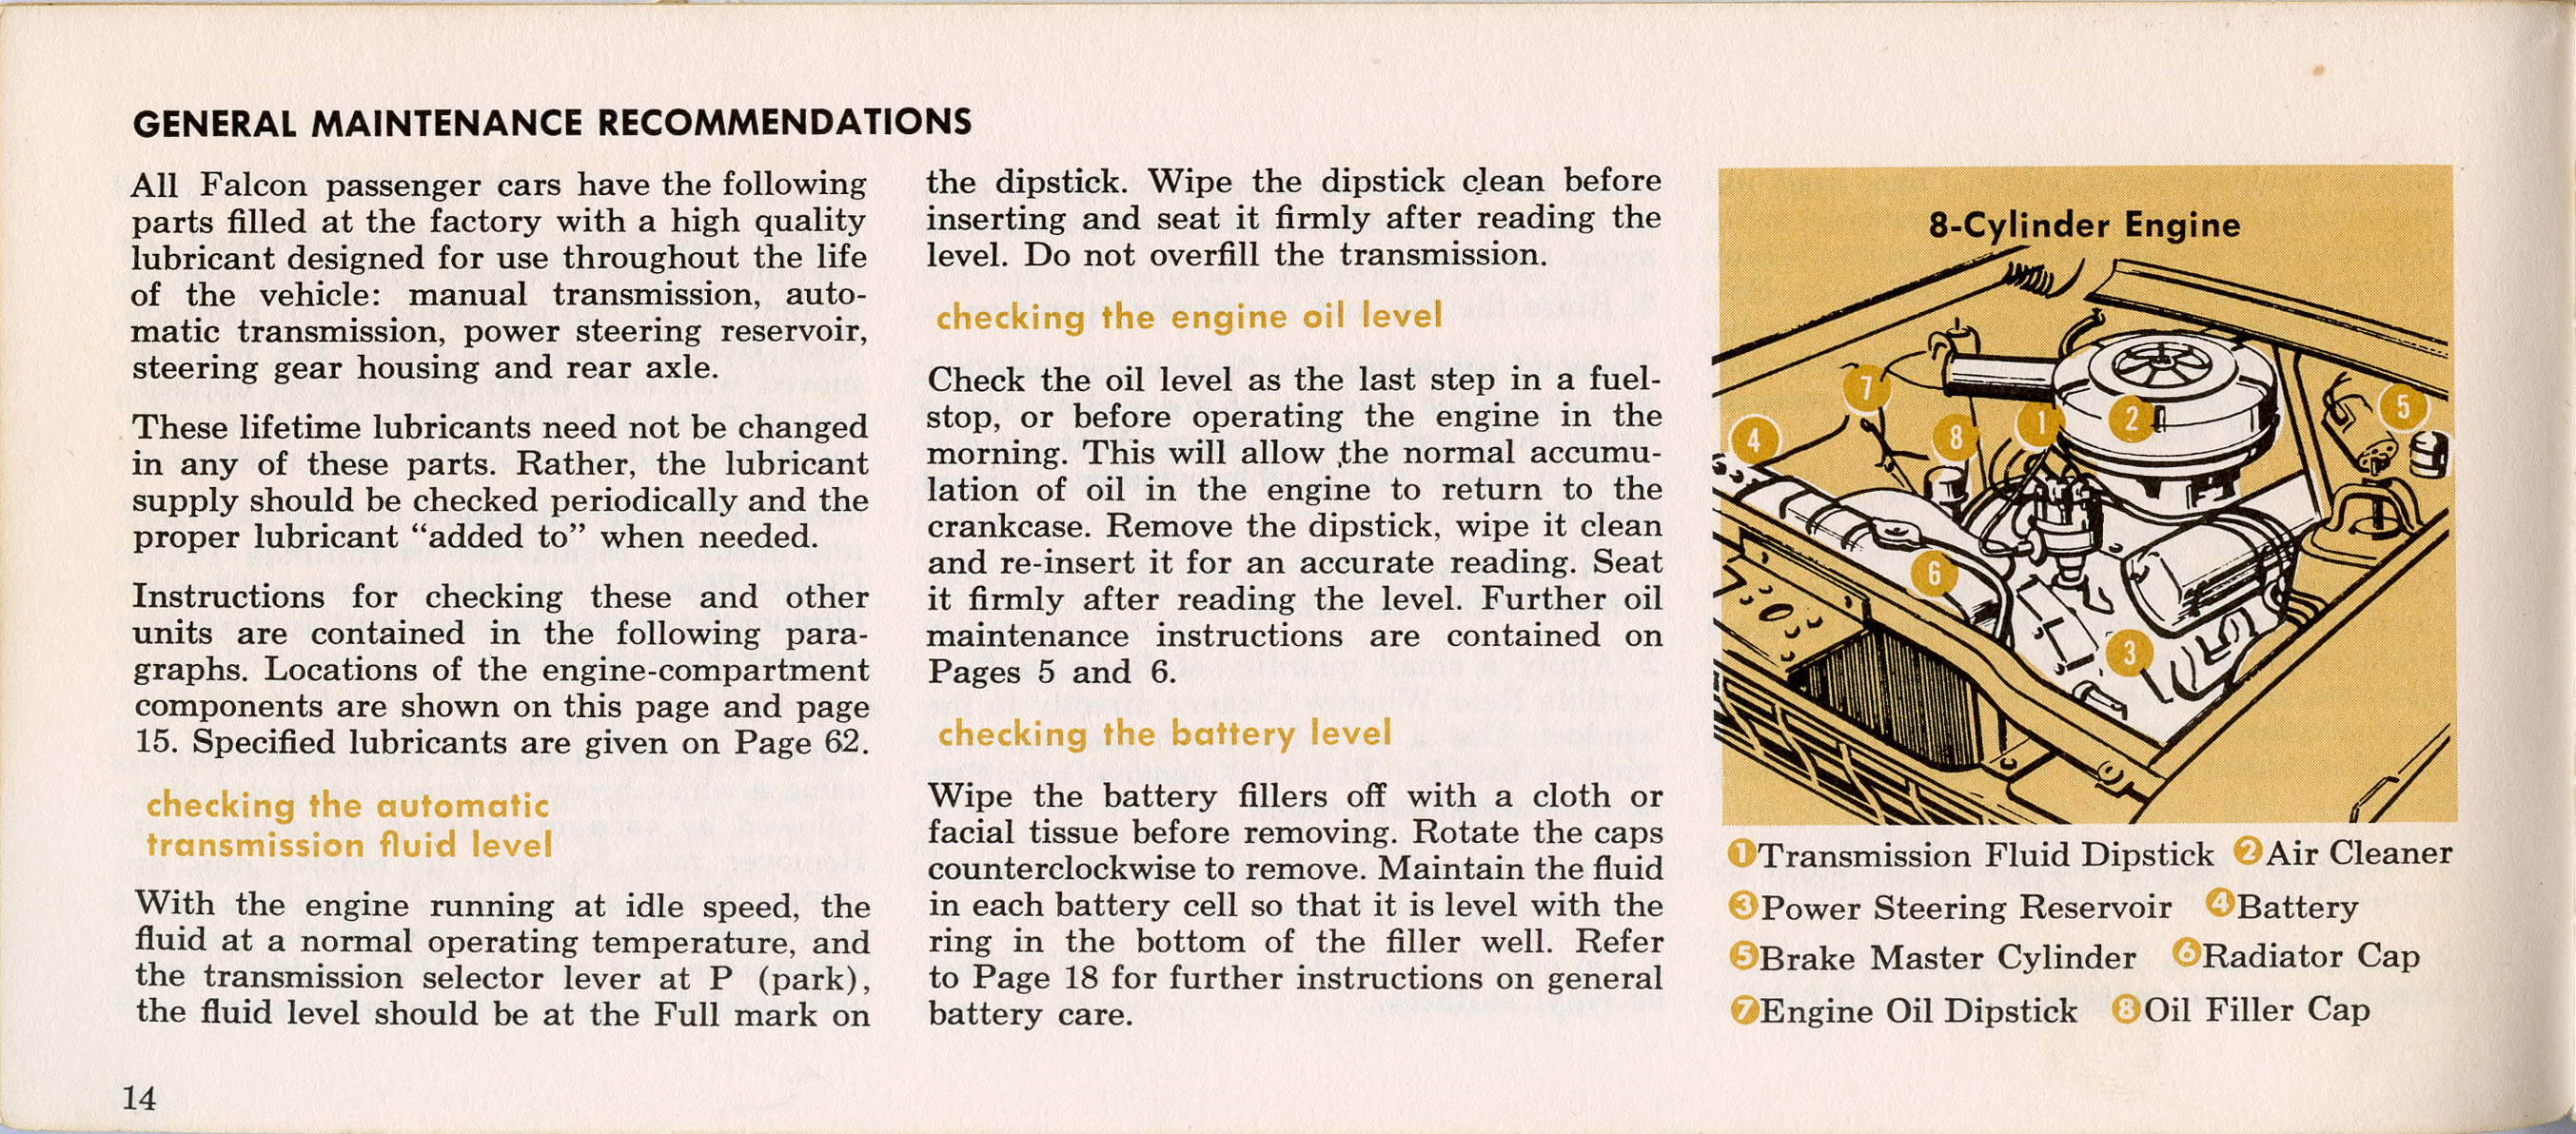 1964 Ford Falcon Owners Manual Page 44